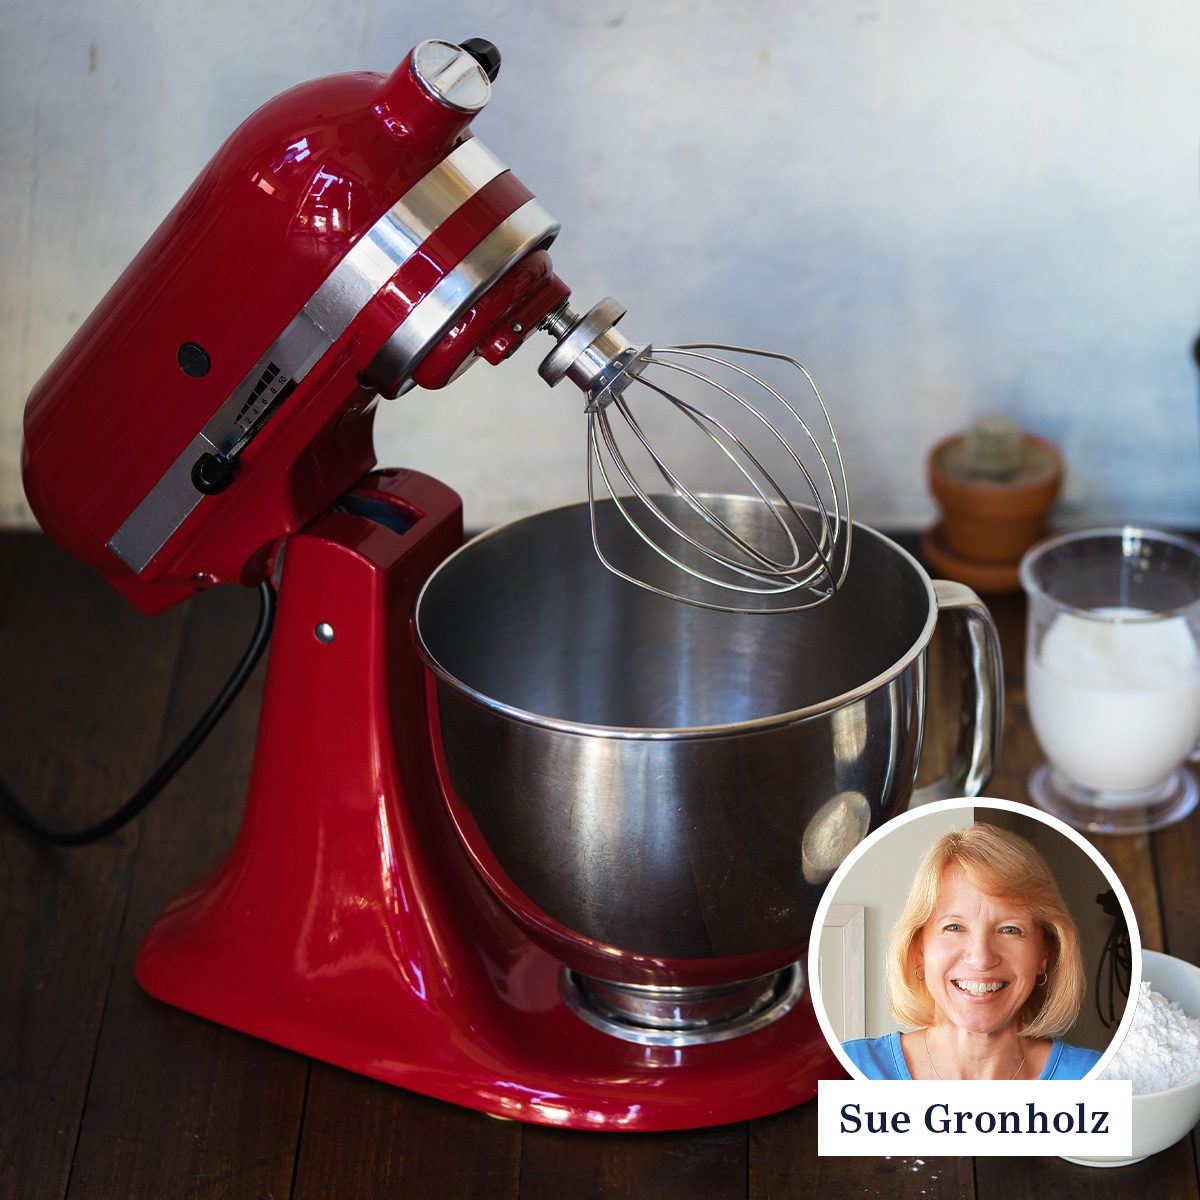 https://www.tasteofhome.com/wp-content/uploads/2022/09/kitchenaid-mixer-from-sue-gronholz-getty-images-courtesy-sue-gronholz.jpg?fit=700%2C700